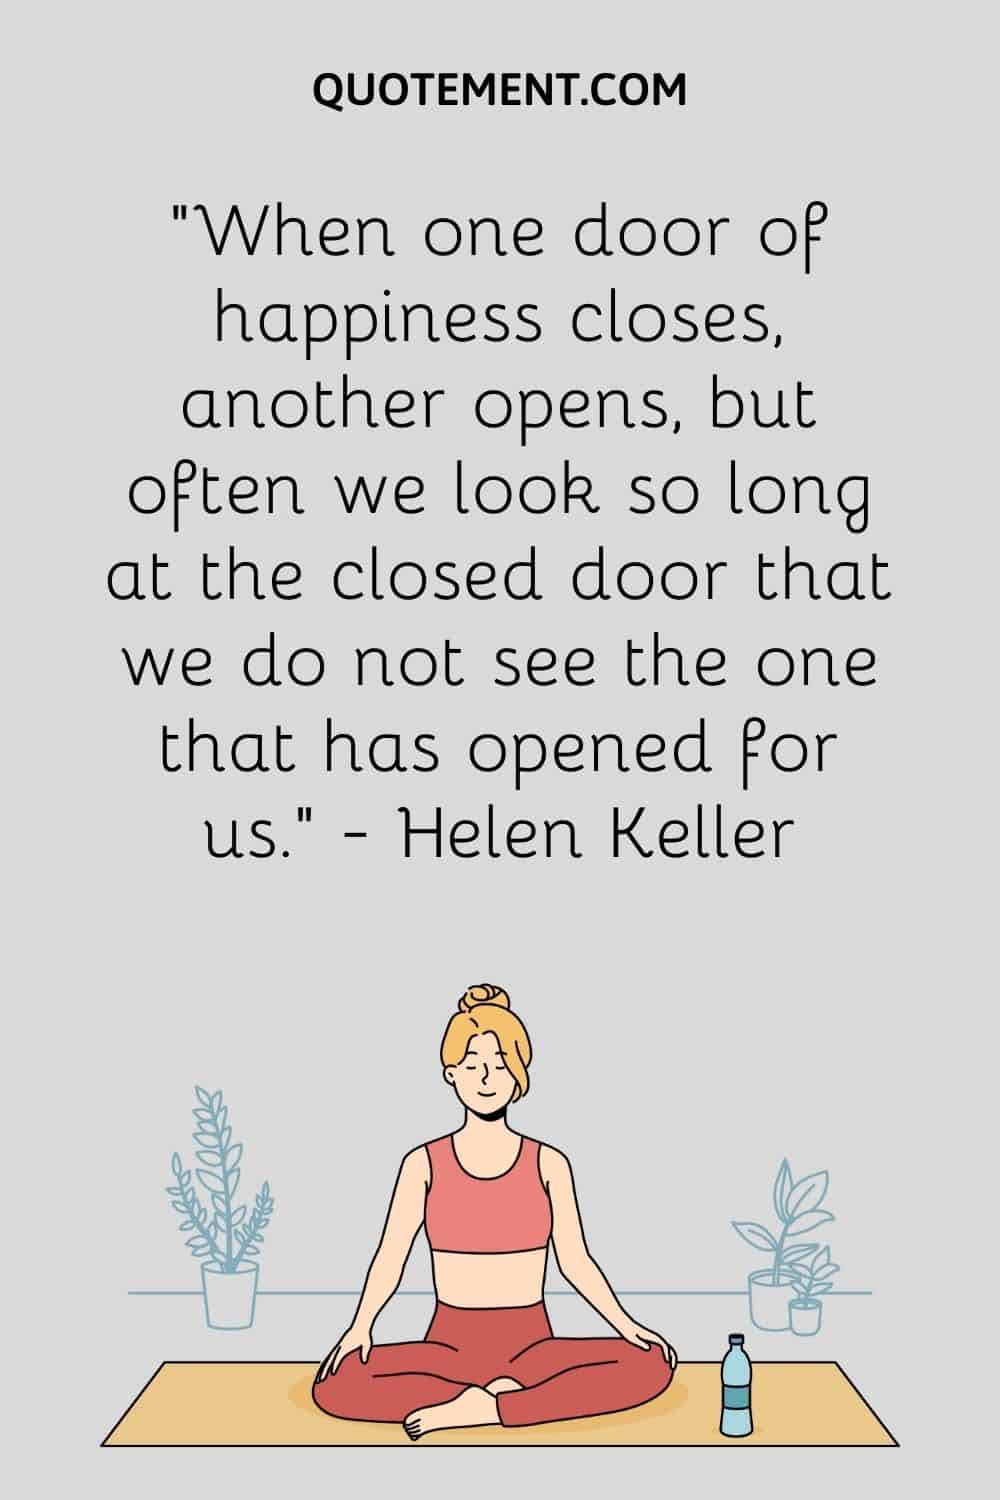 When one door of happiness closes, another opens, but often we look so long at the closed door that we do not see the one that has opened for us